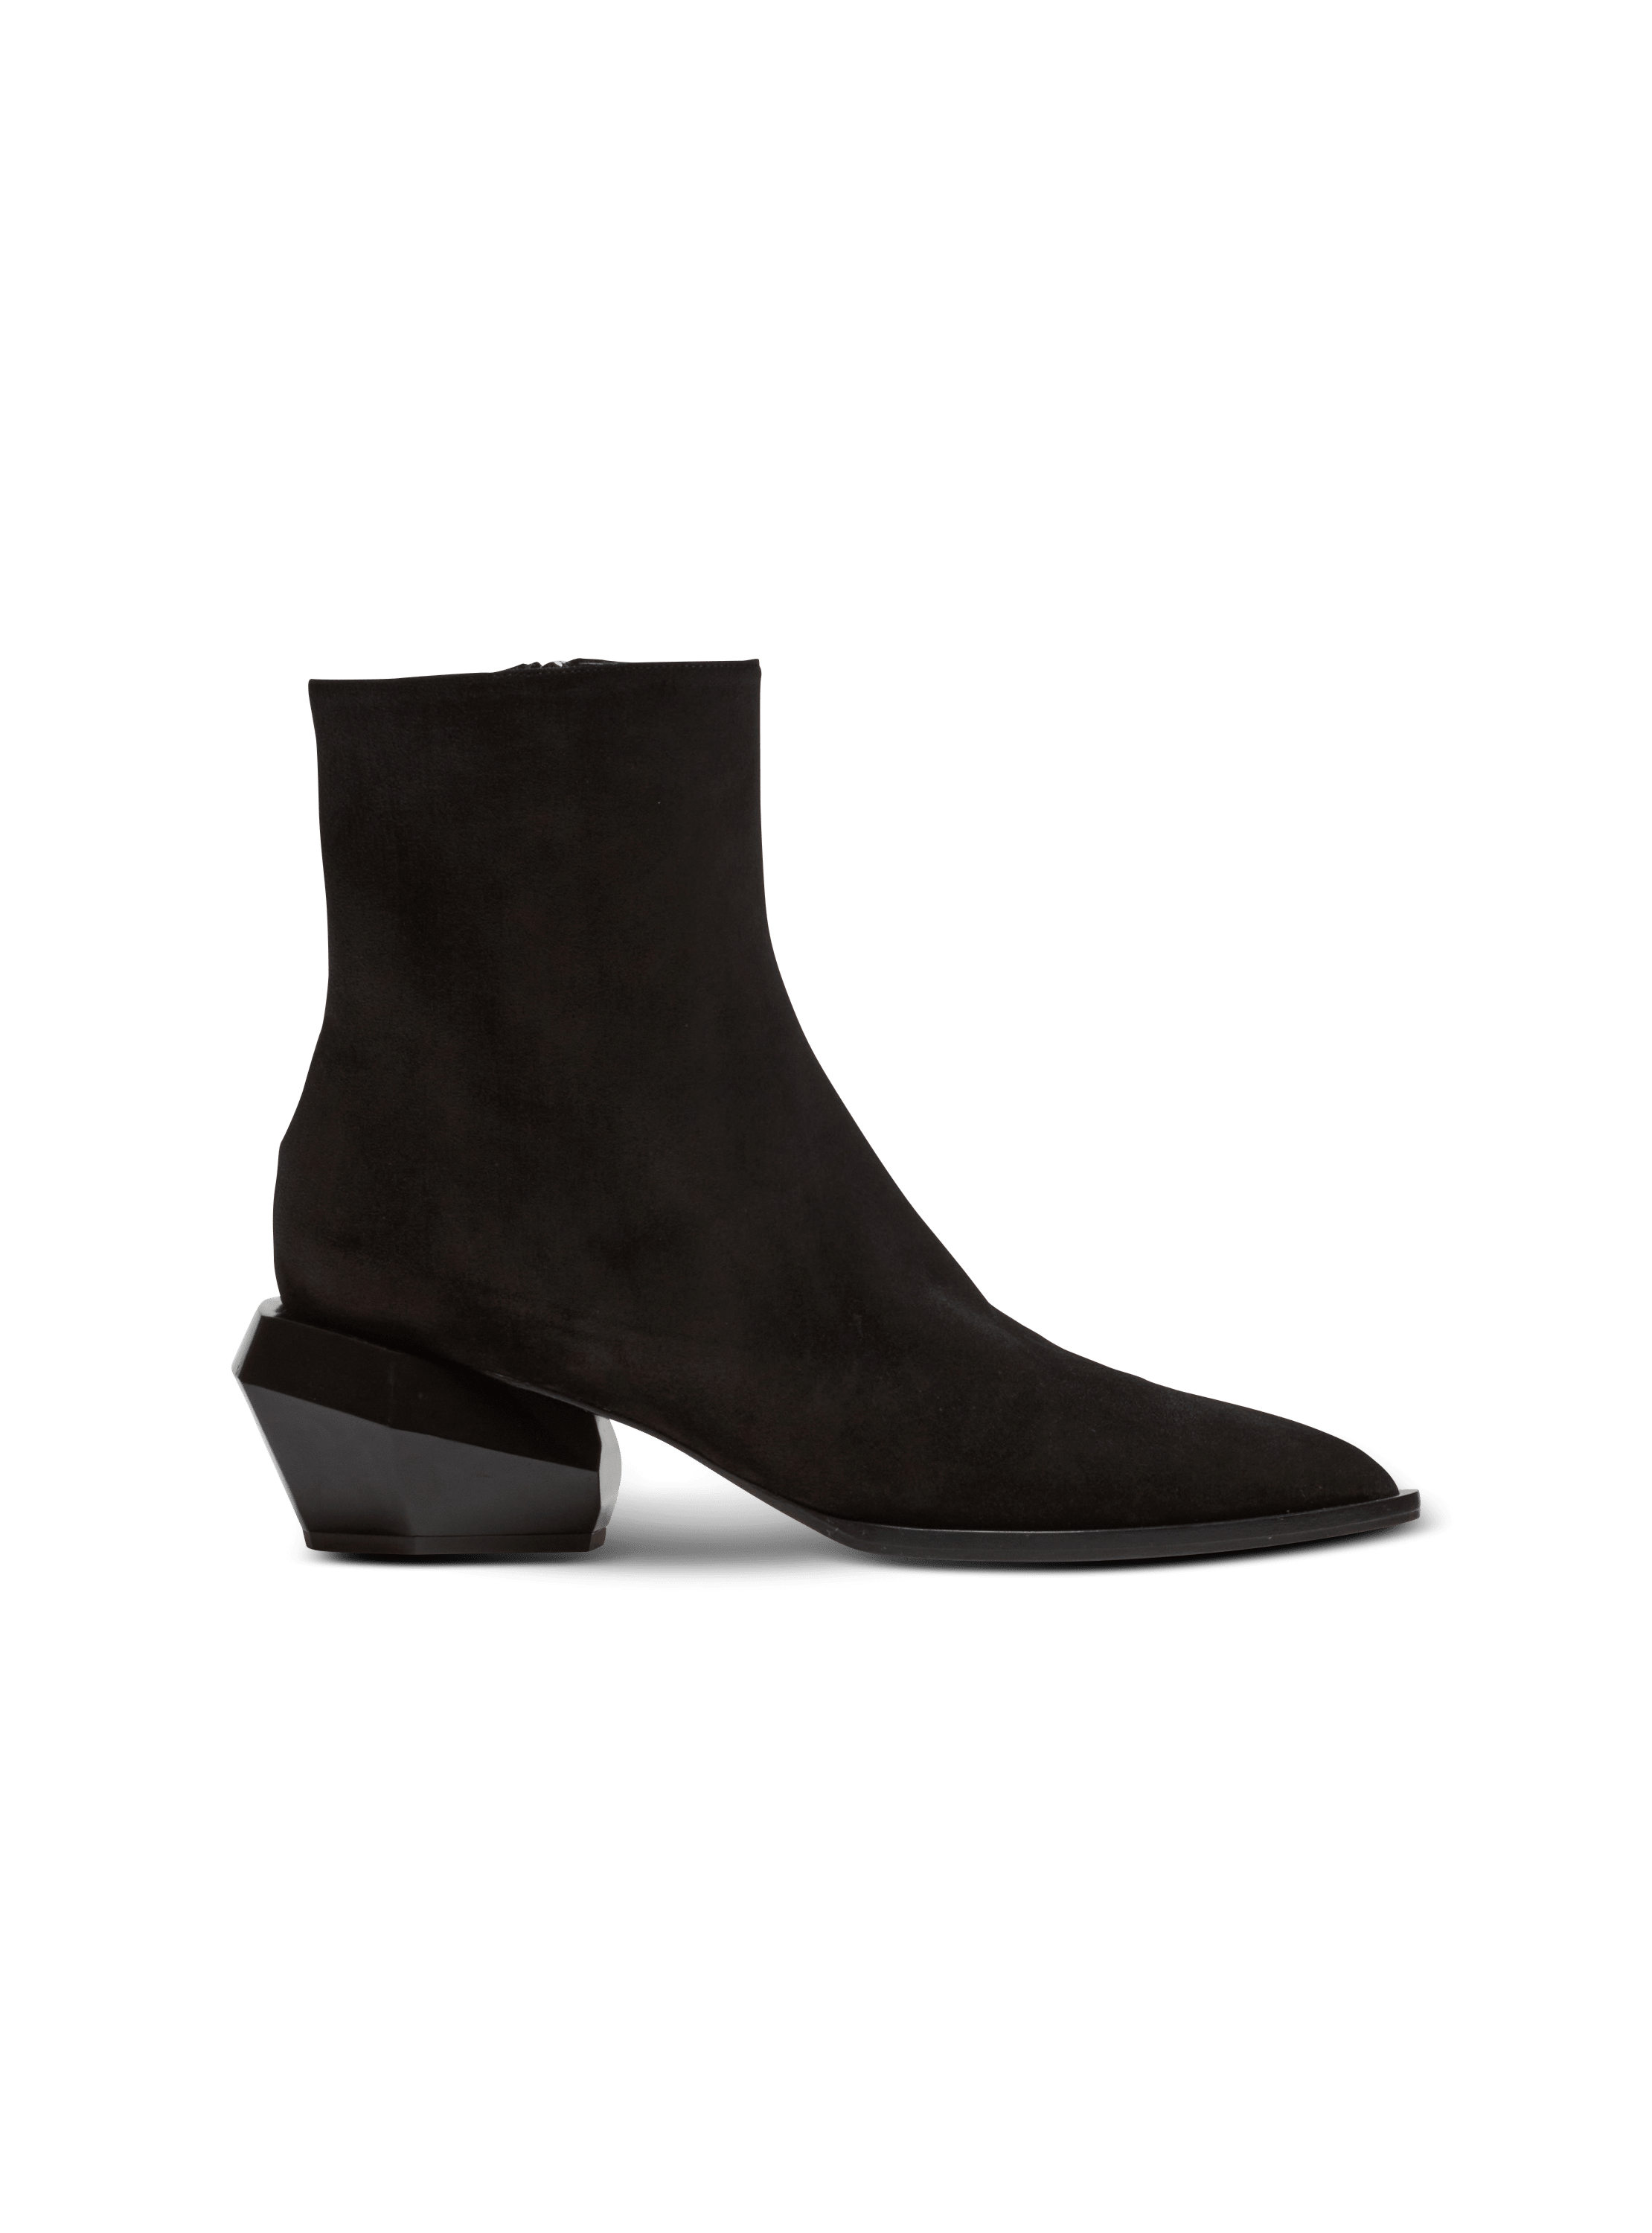 Billy suede ankle boots with diamond heel, black, hi-res